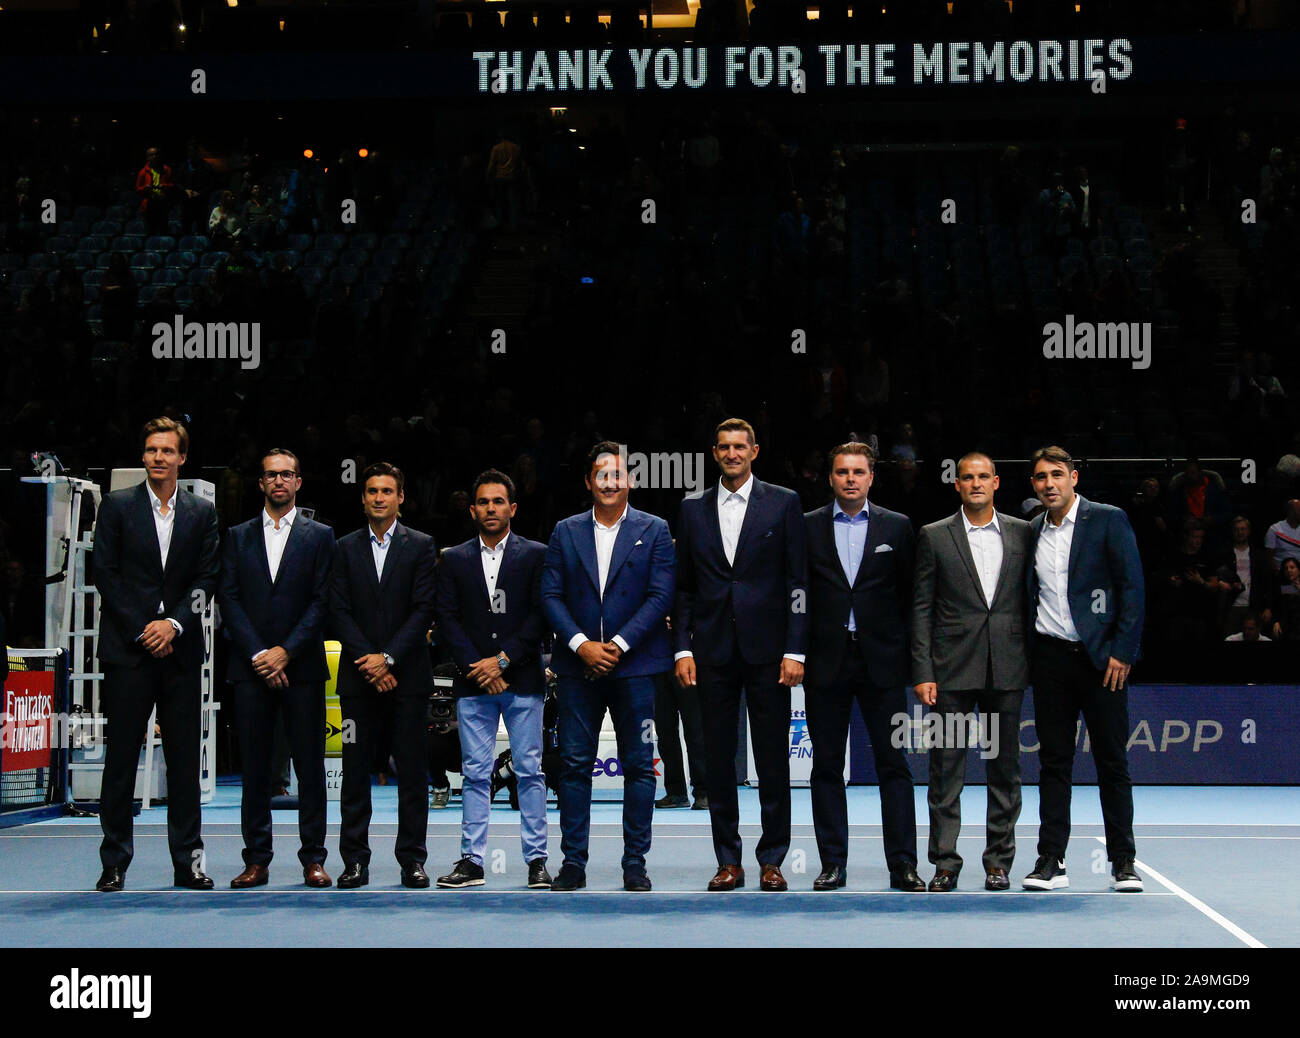 Arena. London, UK. 16th Nov, 2019. Nitto ATP Tennis Finals; A presentation  on court to honour the players who have given many years of service on the ATP  Tour: Nicolas Almagro, Marcos